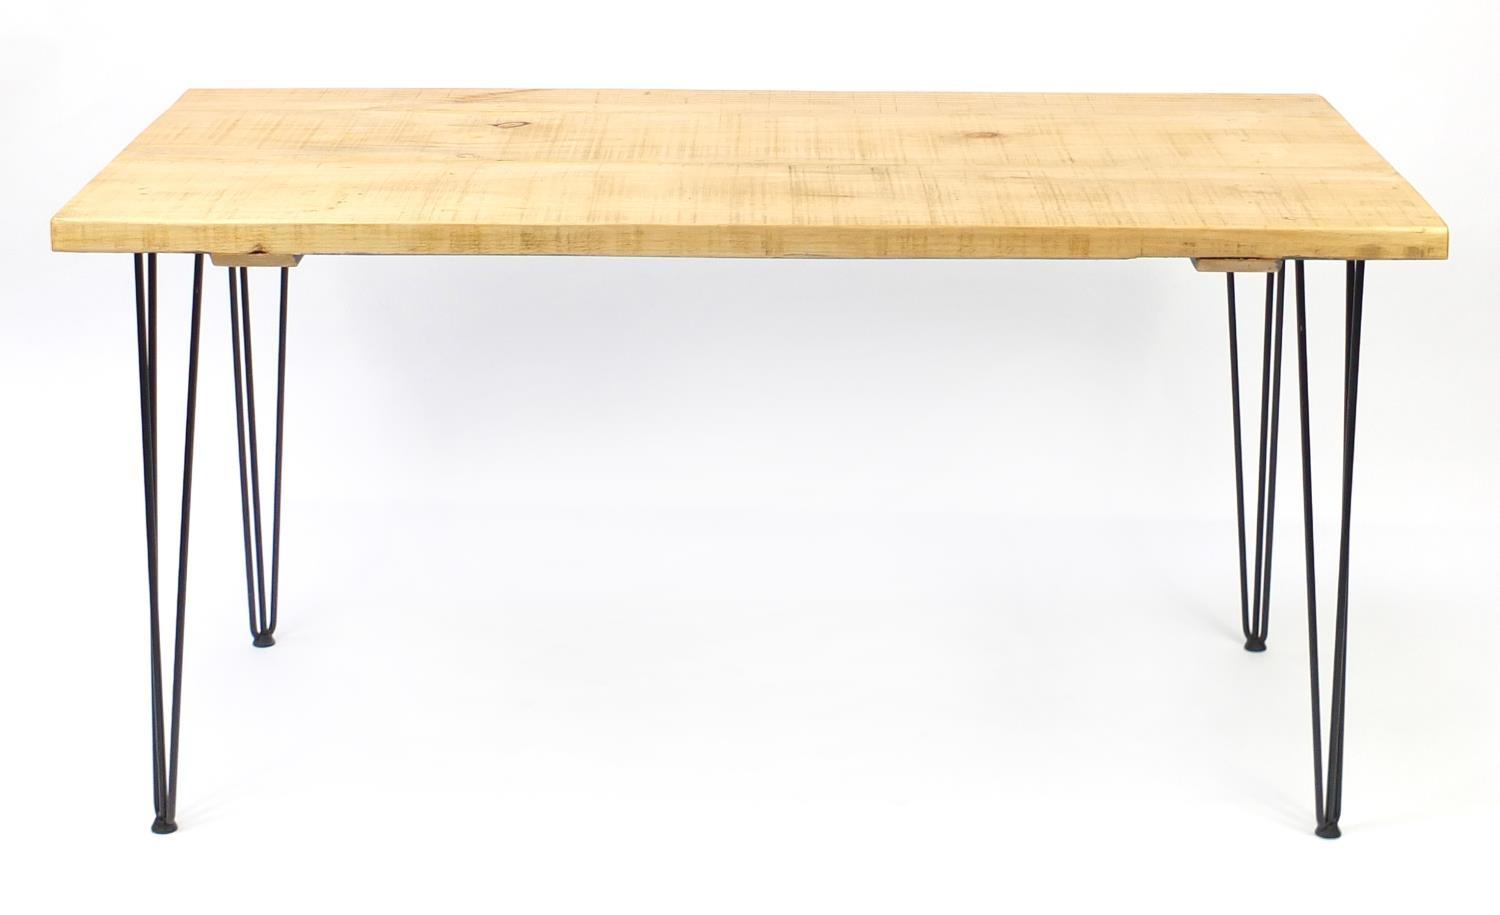 Contemporary light wood dining table with metal hairpin legs, 76c H x 151cm W x 75cm D :For